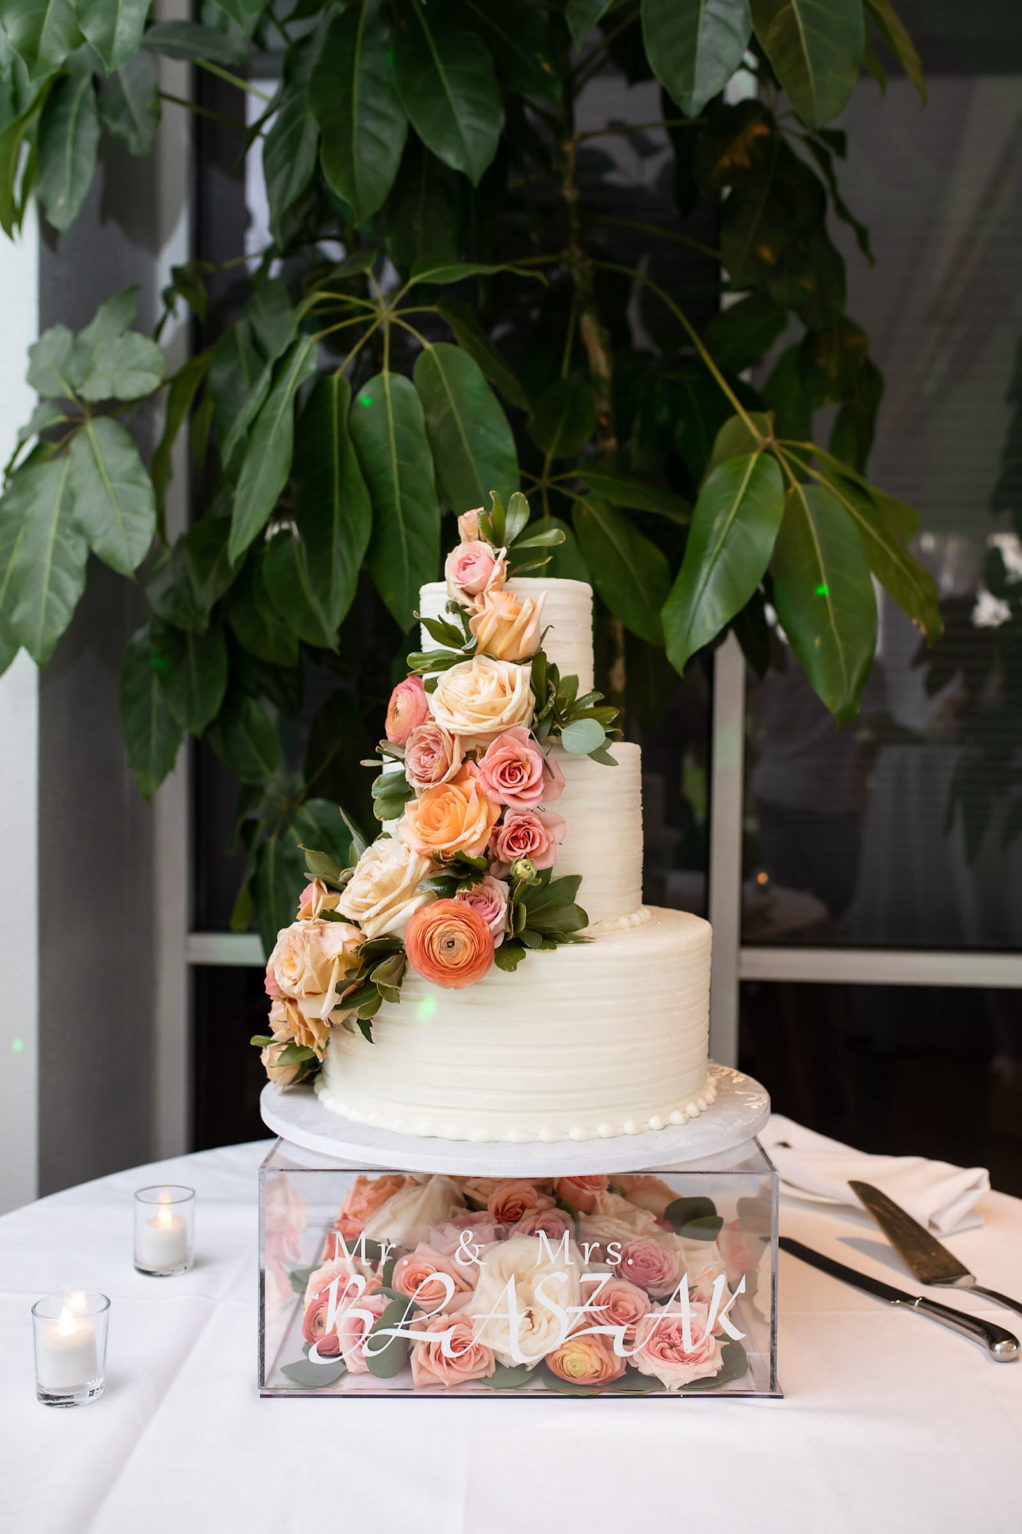 Three Tier Buttercream Striped Icing Wedding Cake with Fresh Flowers of Peach Roses and Coral Ranunculus and Greenery Cascading down the Side | Square Clear Acrylic Cake Stand filled with Peach and Pink Fresh Flowers Roses with Custom Bride and Groom Name Decal